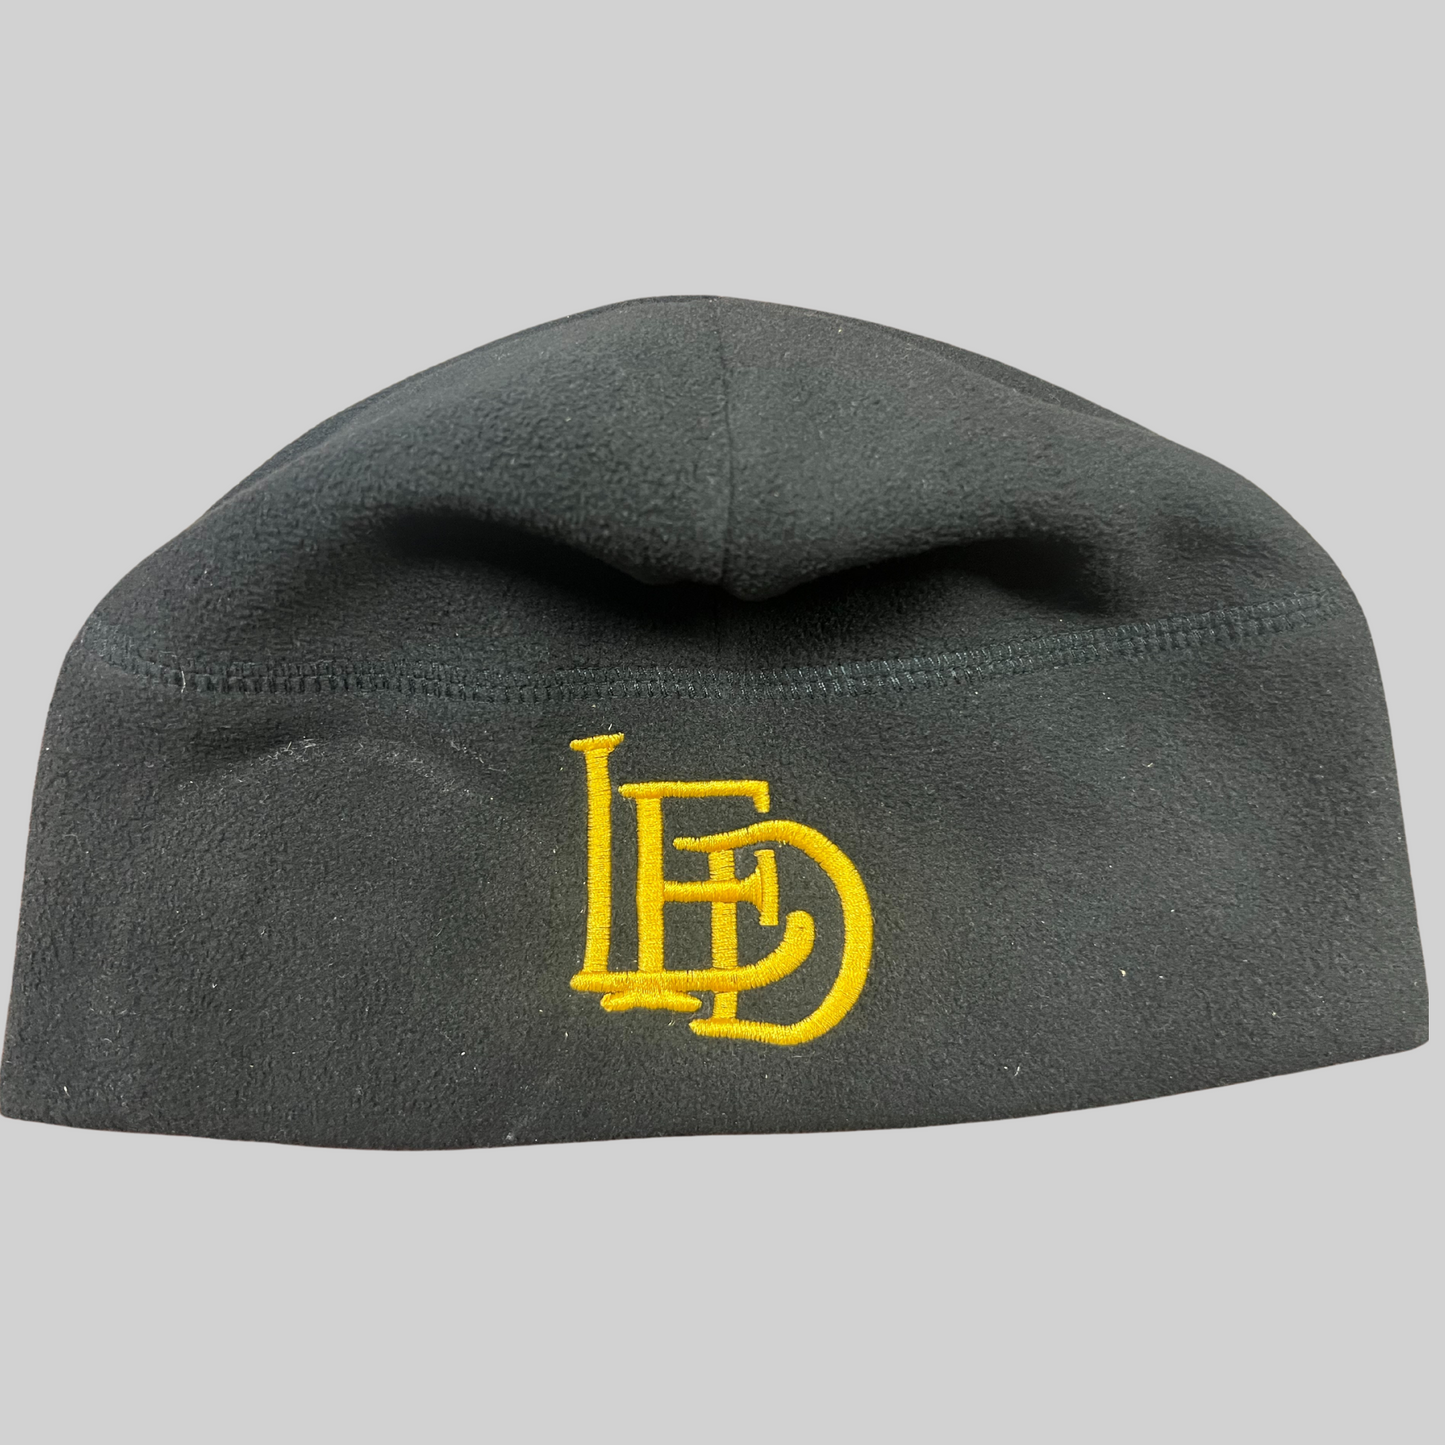 LFD Local 3606 Firefighters Non Association Members On Duty Beanie